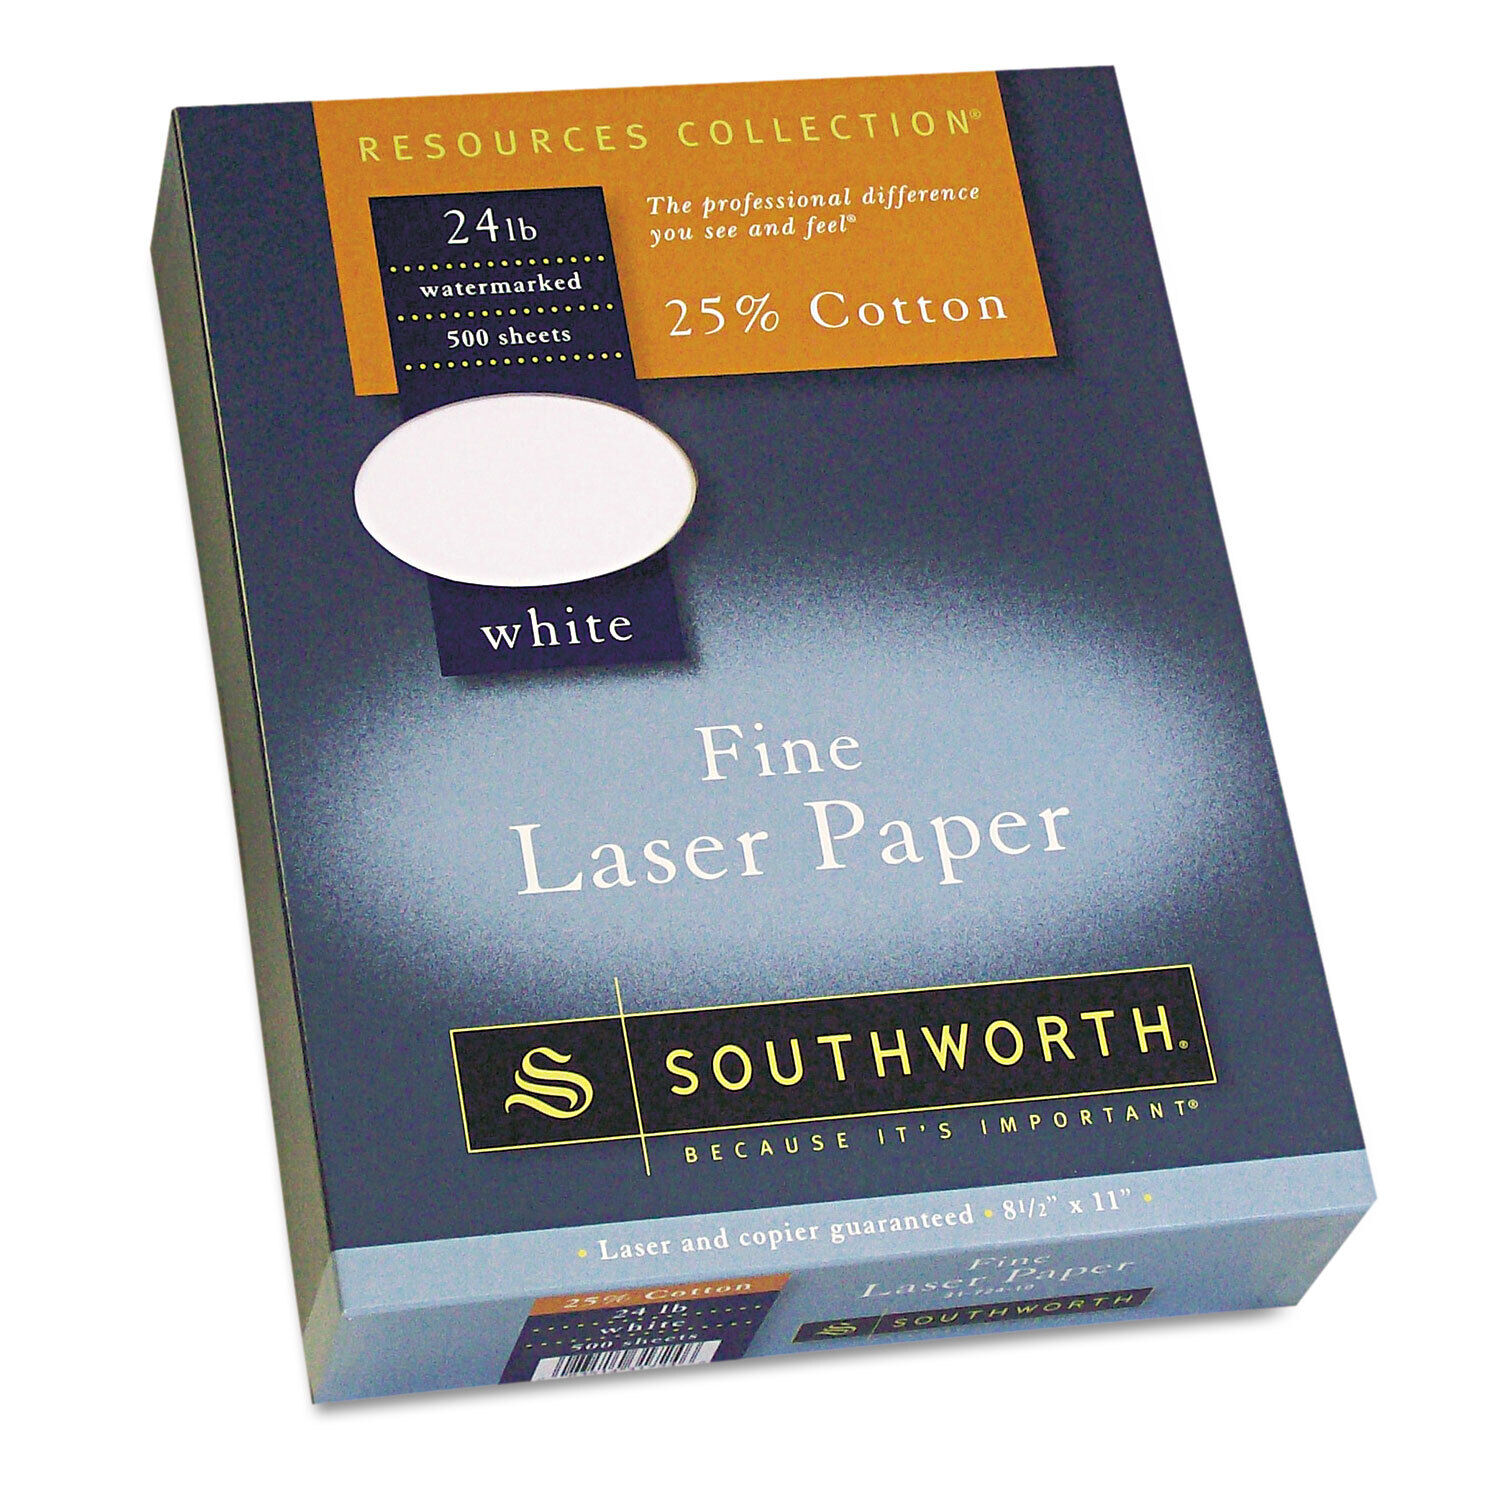 Southworth 25% Cotton Laser Paper White 24 lbs. Smooth Finish 8-1/2 x 11